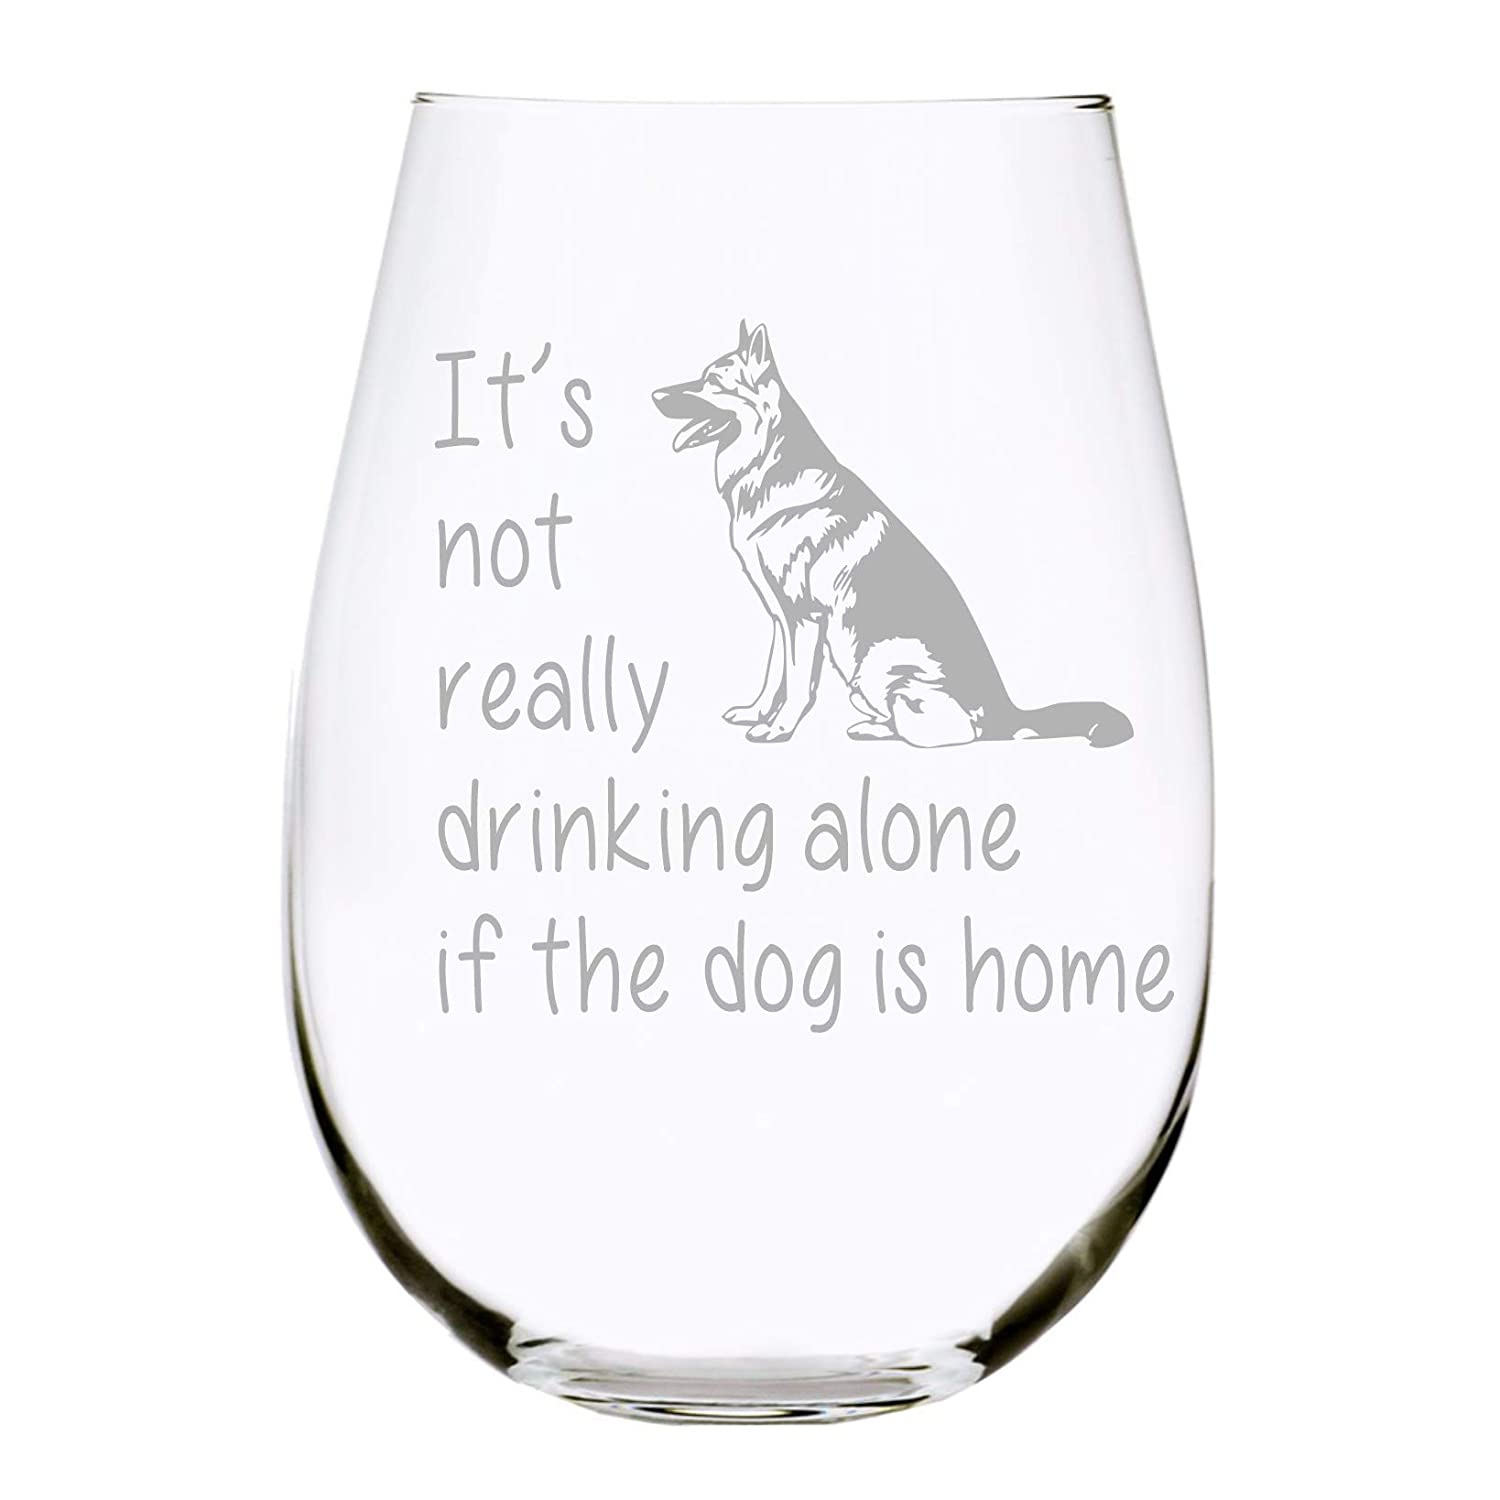 C M It's not really drinking alone if the dog is home-17oz Lead Free Crystal stemless wine glass, Perfect Dog Lover Gift for him or her (D4))